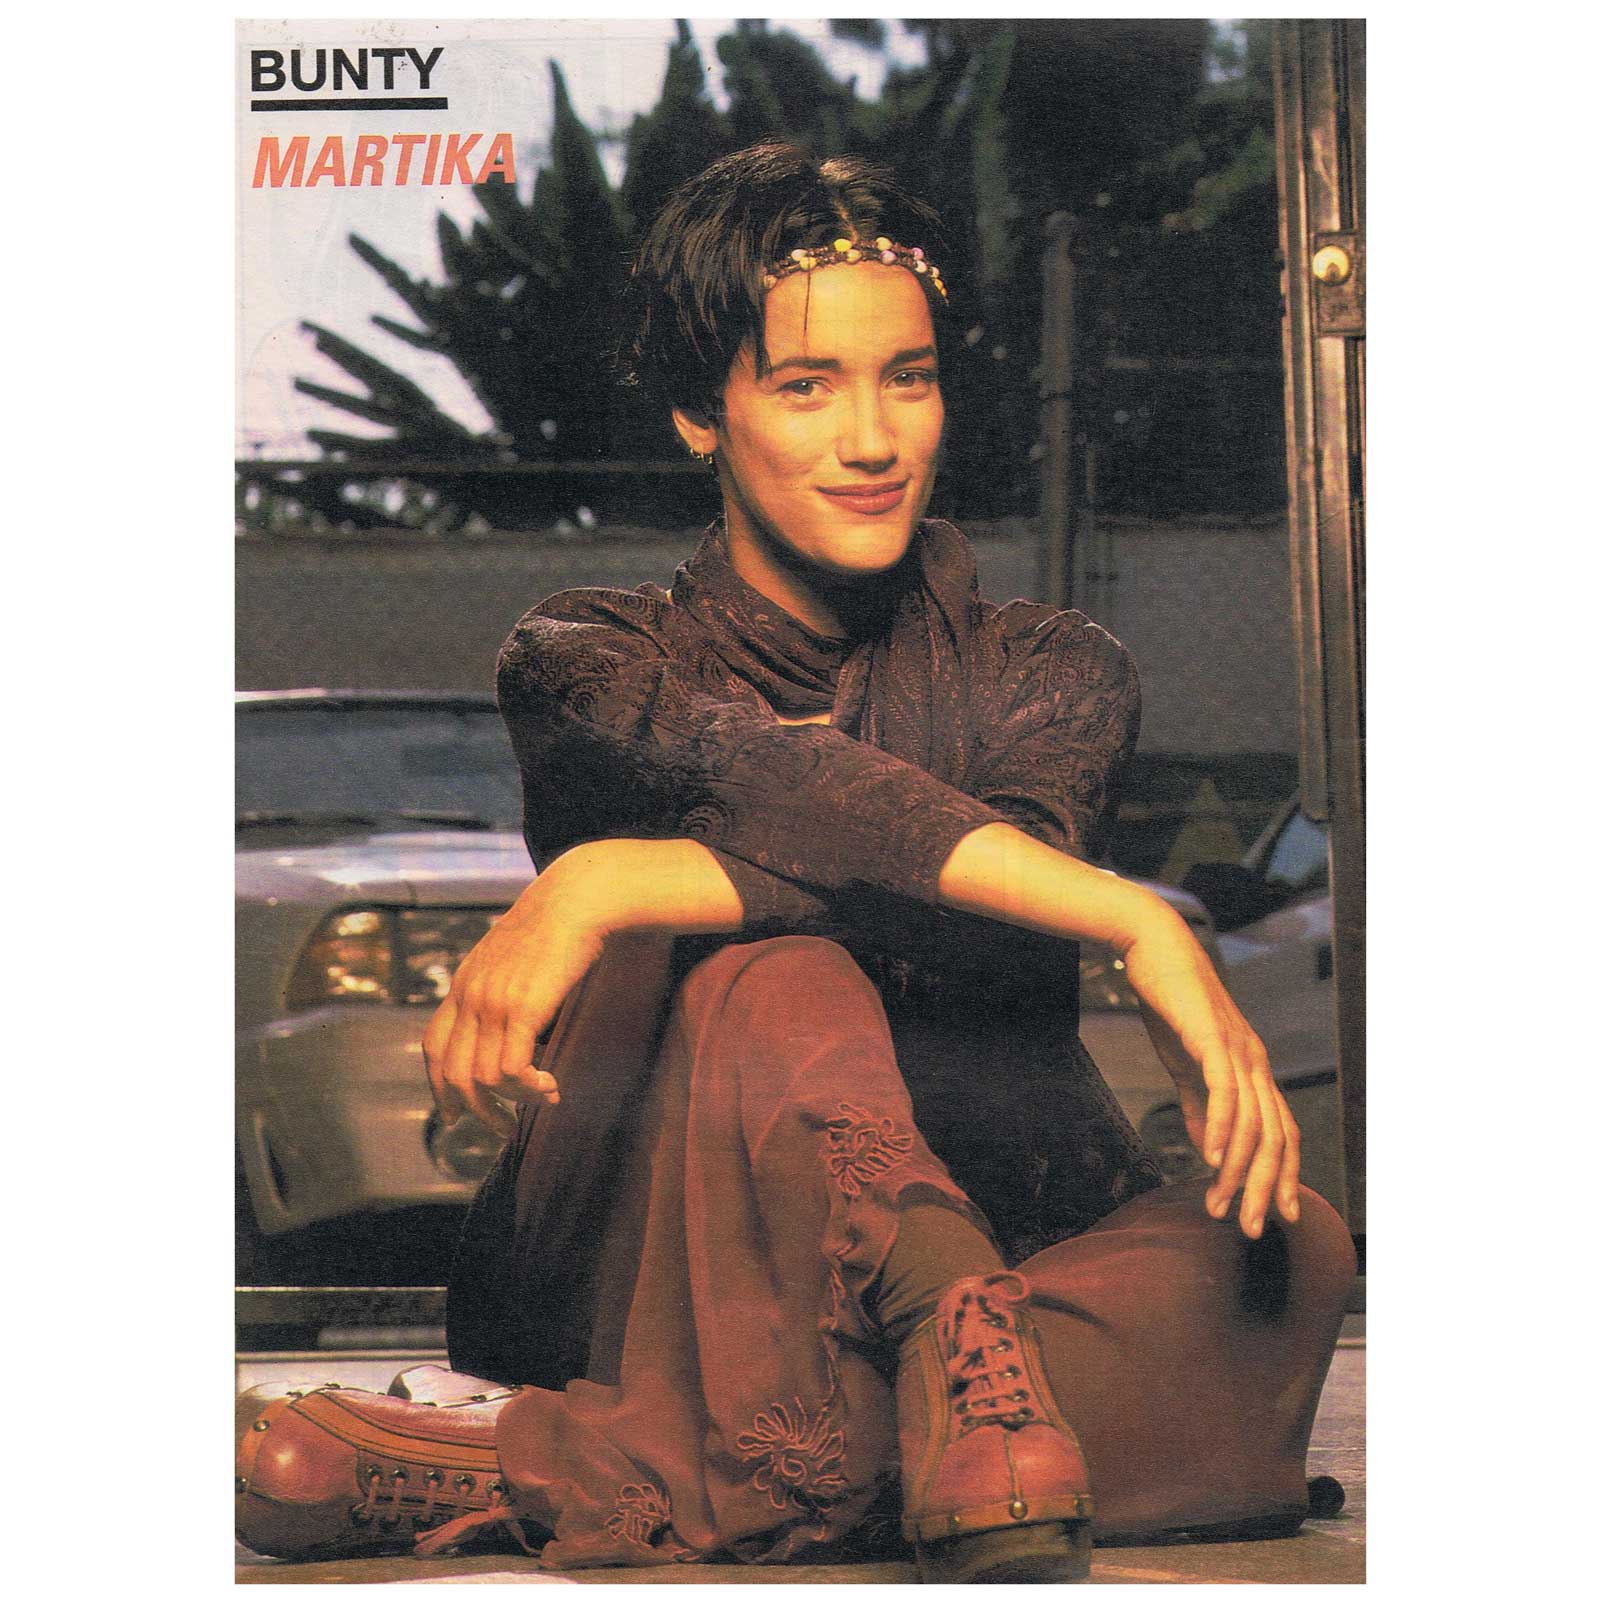 25th April 1992 - BUY NOW - Bunty comic - issue 1789 - an original comic.